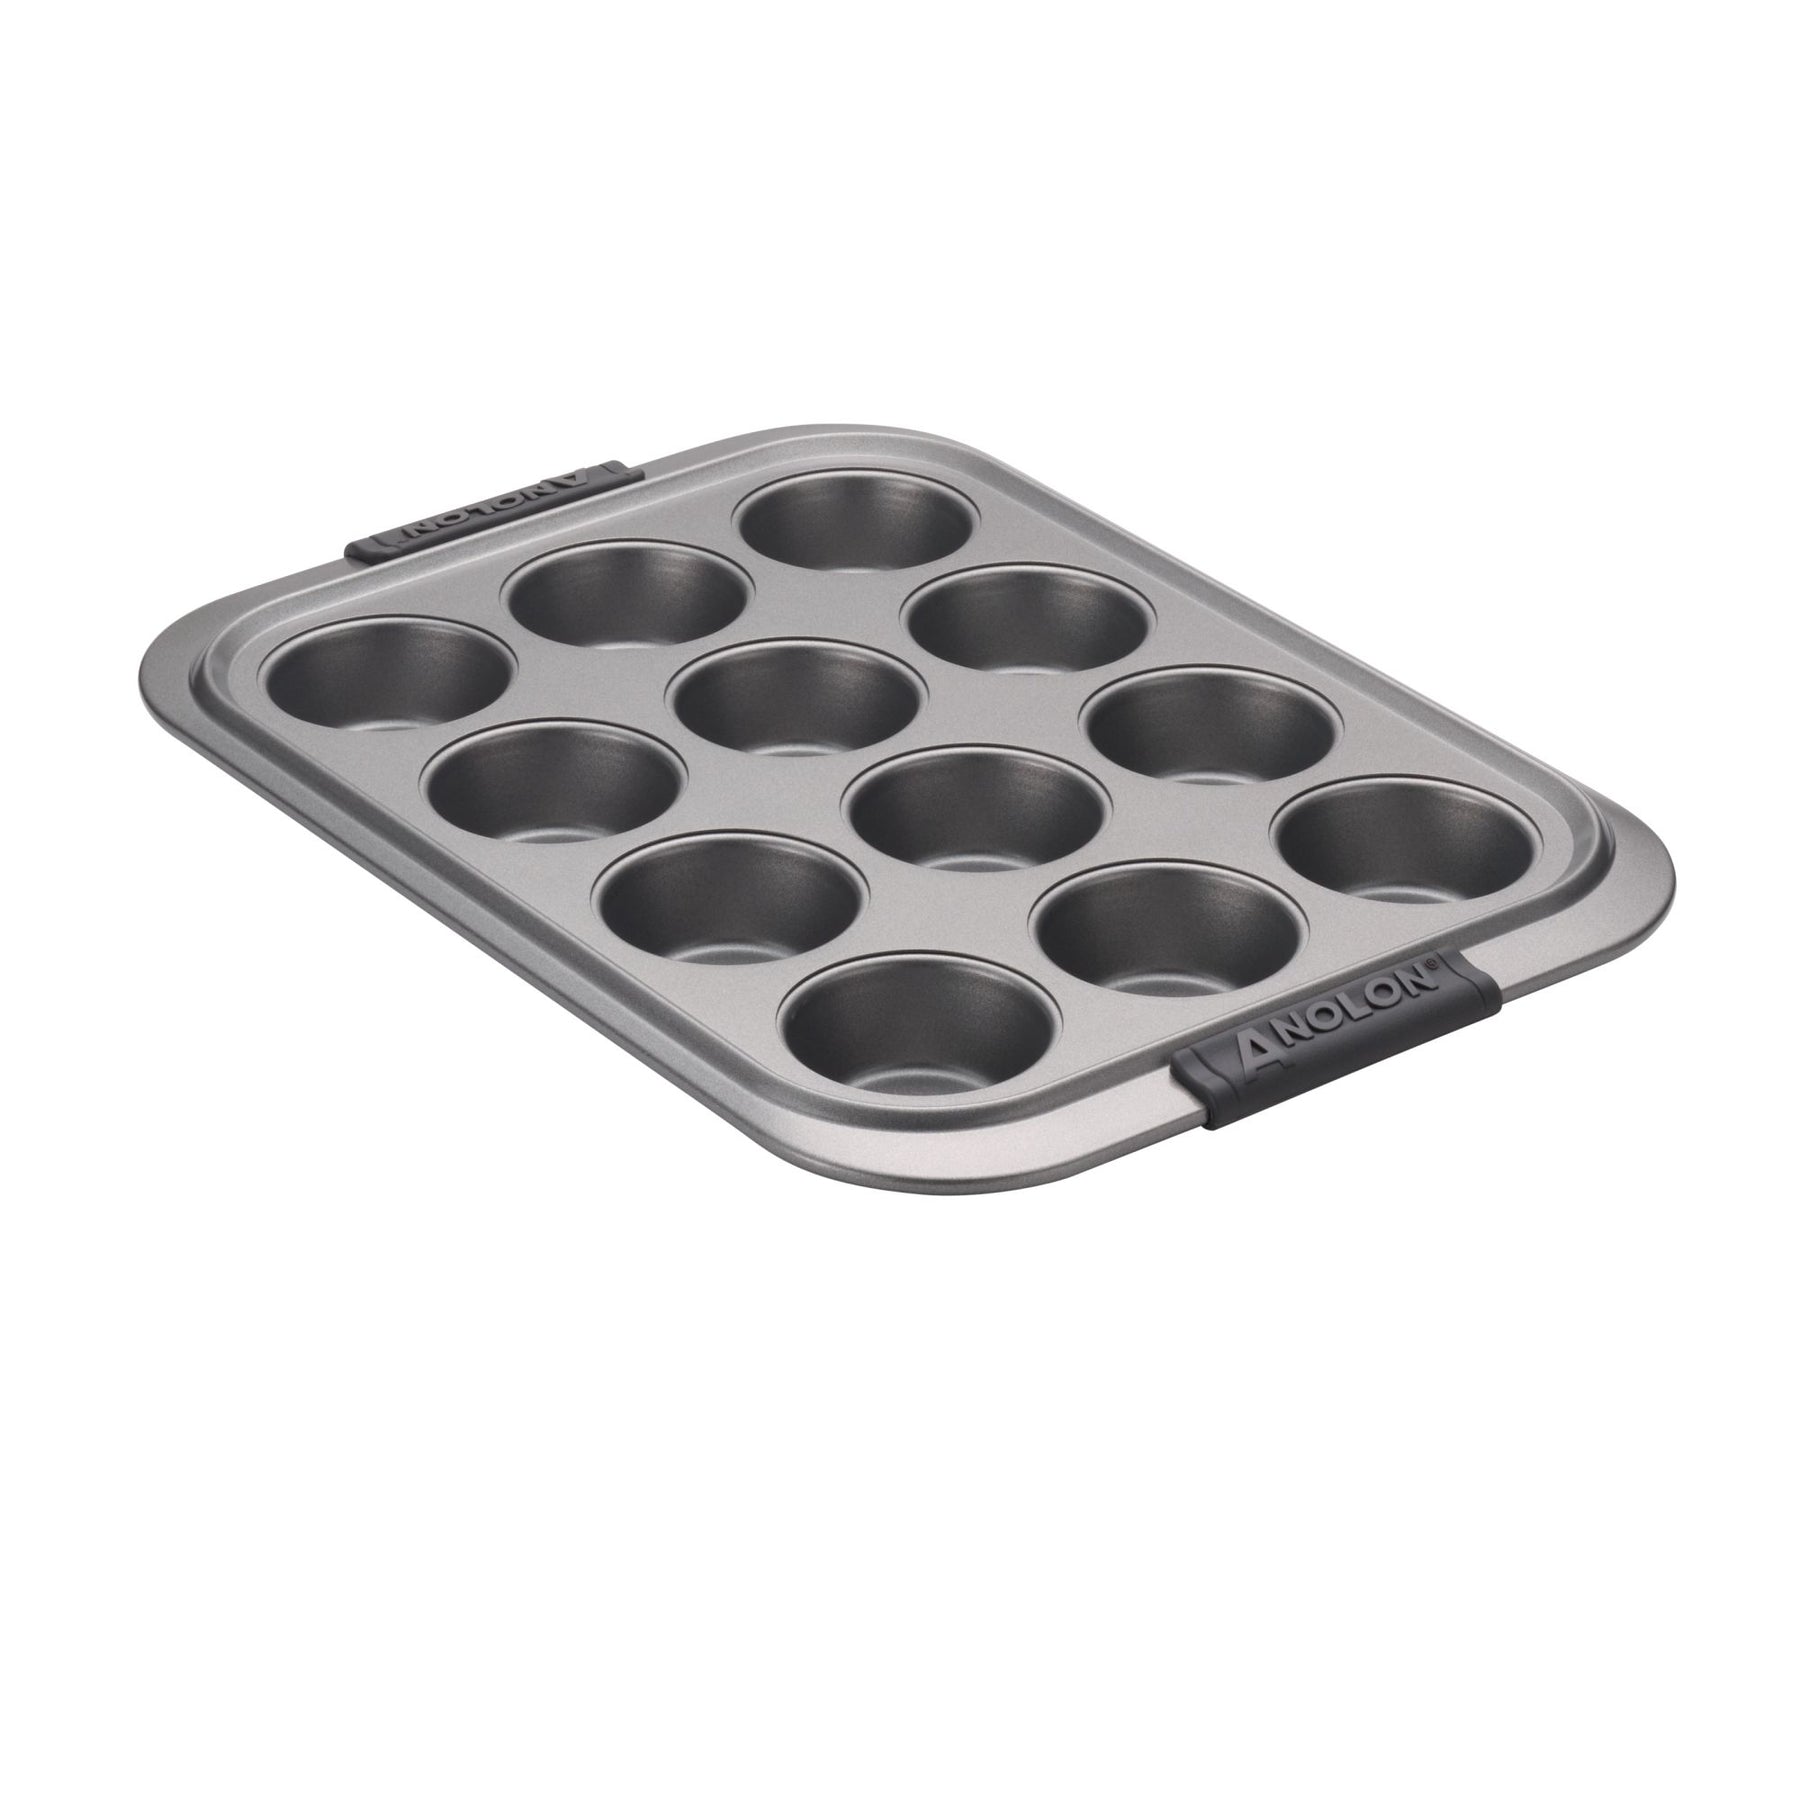 Anolon Advanced Nonstick Bakeware Silicone Grips Cookie Sheet, Baking Pans, Household